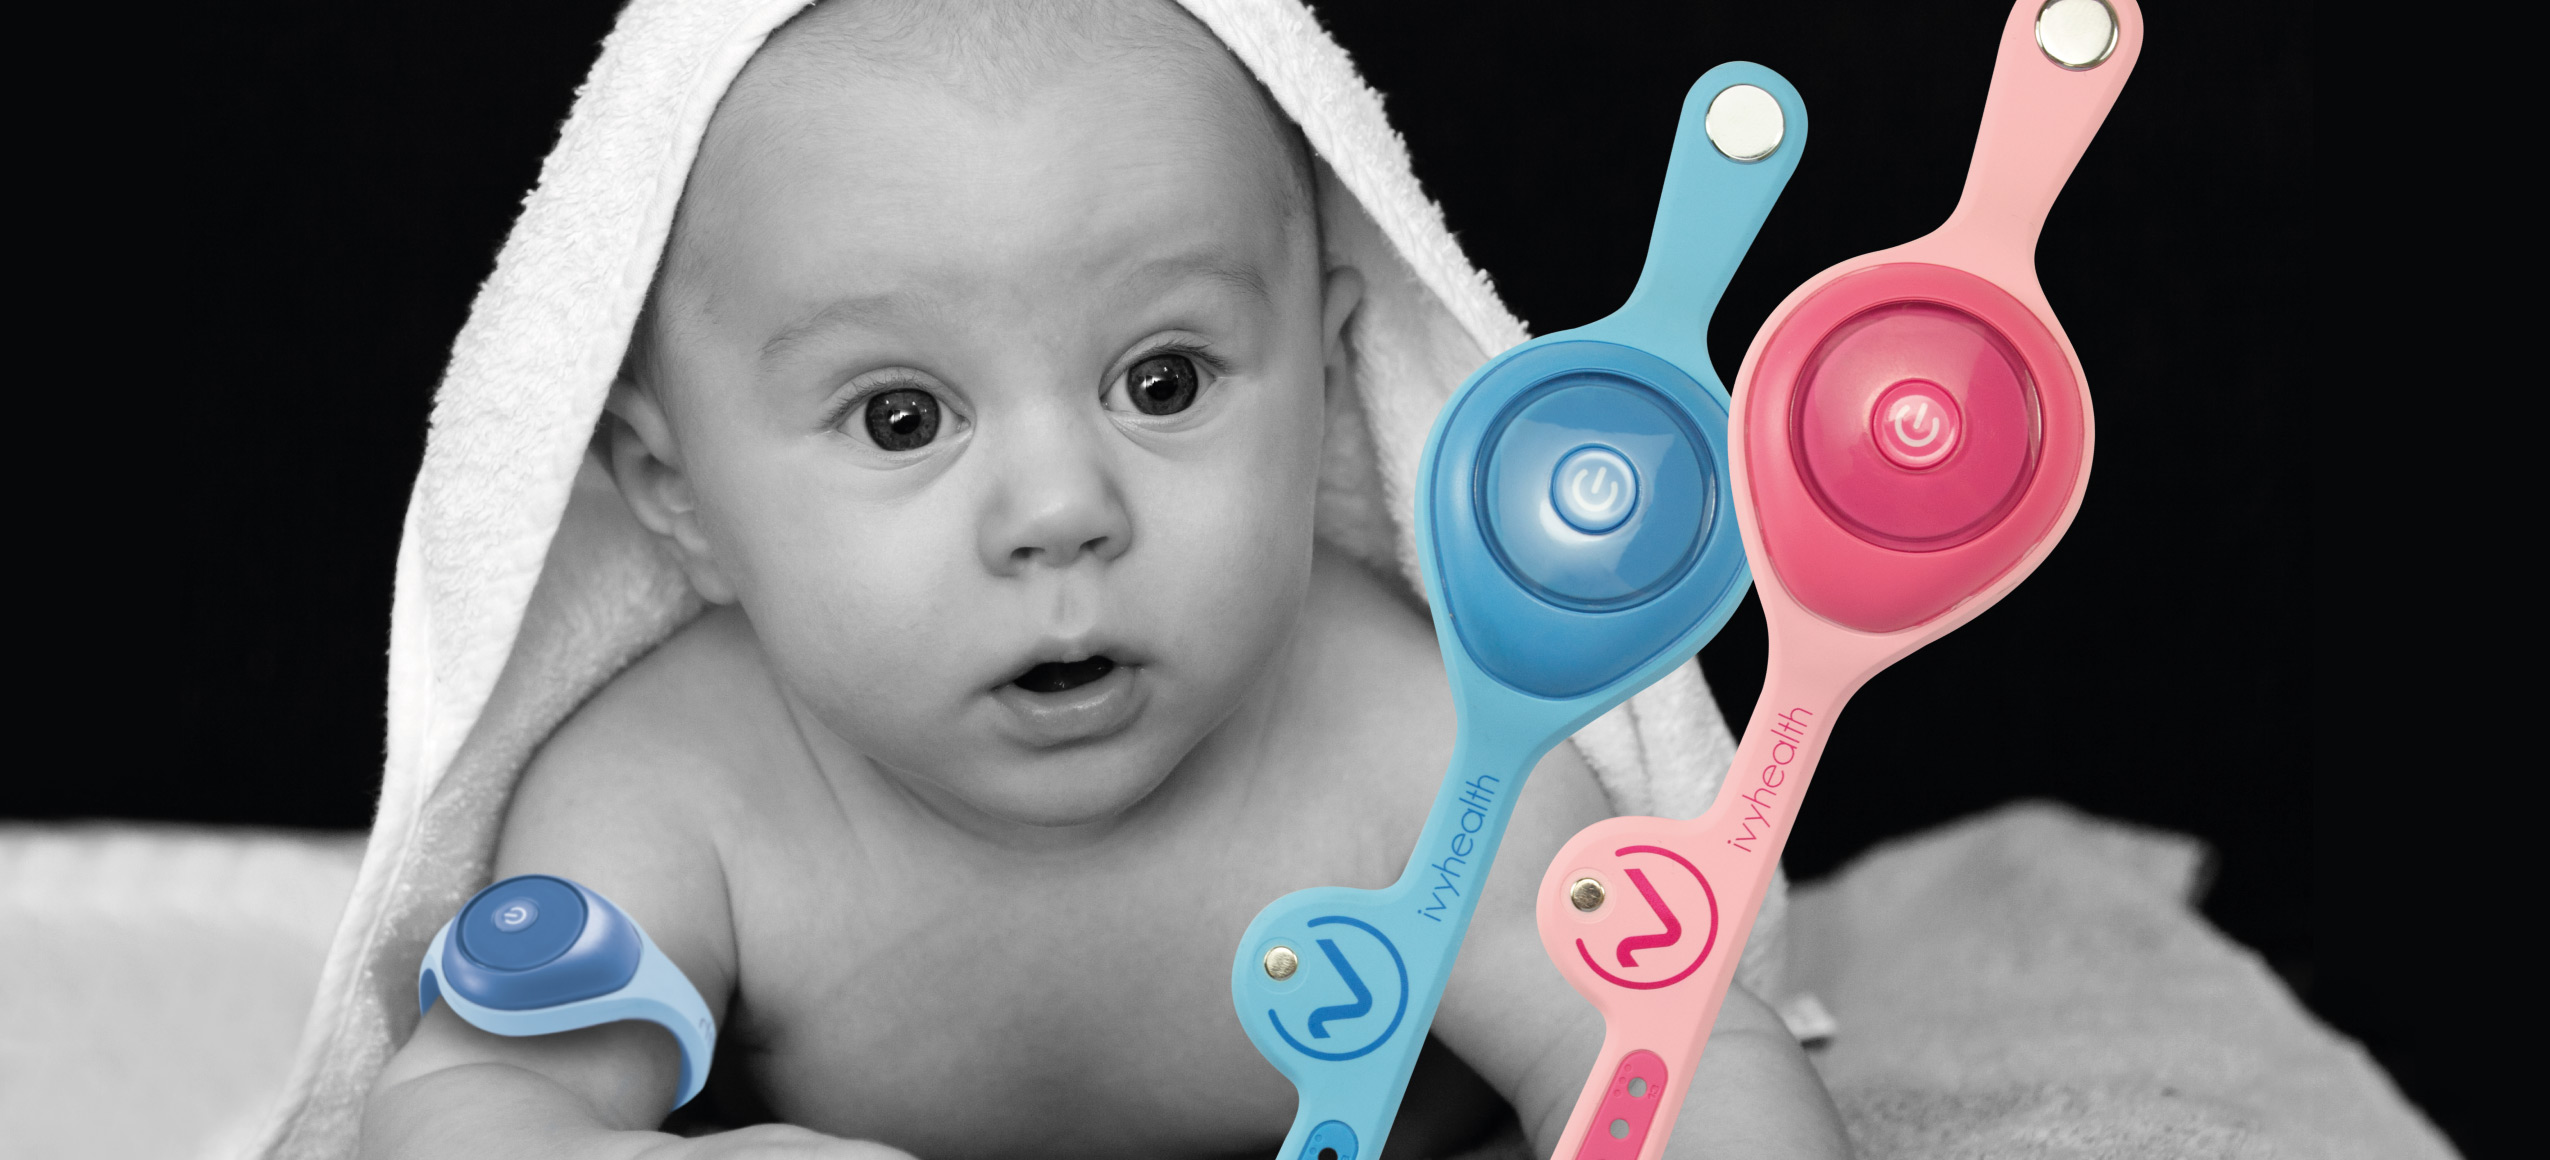 Wireless baby thermometer